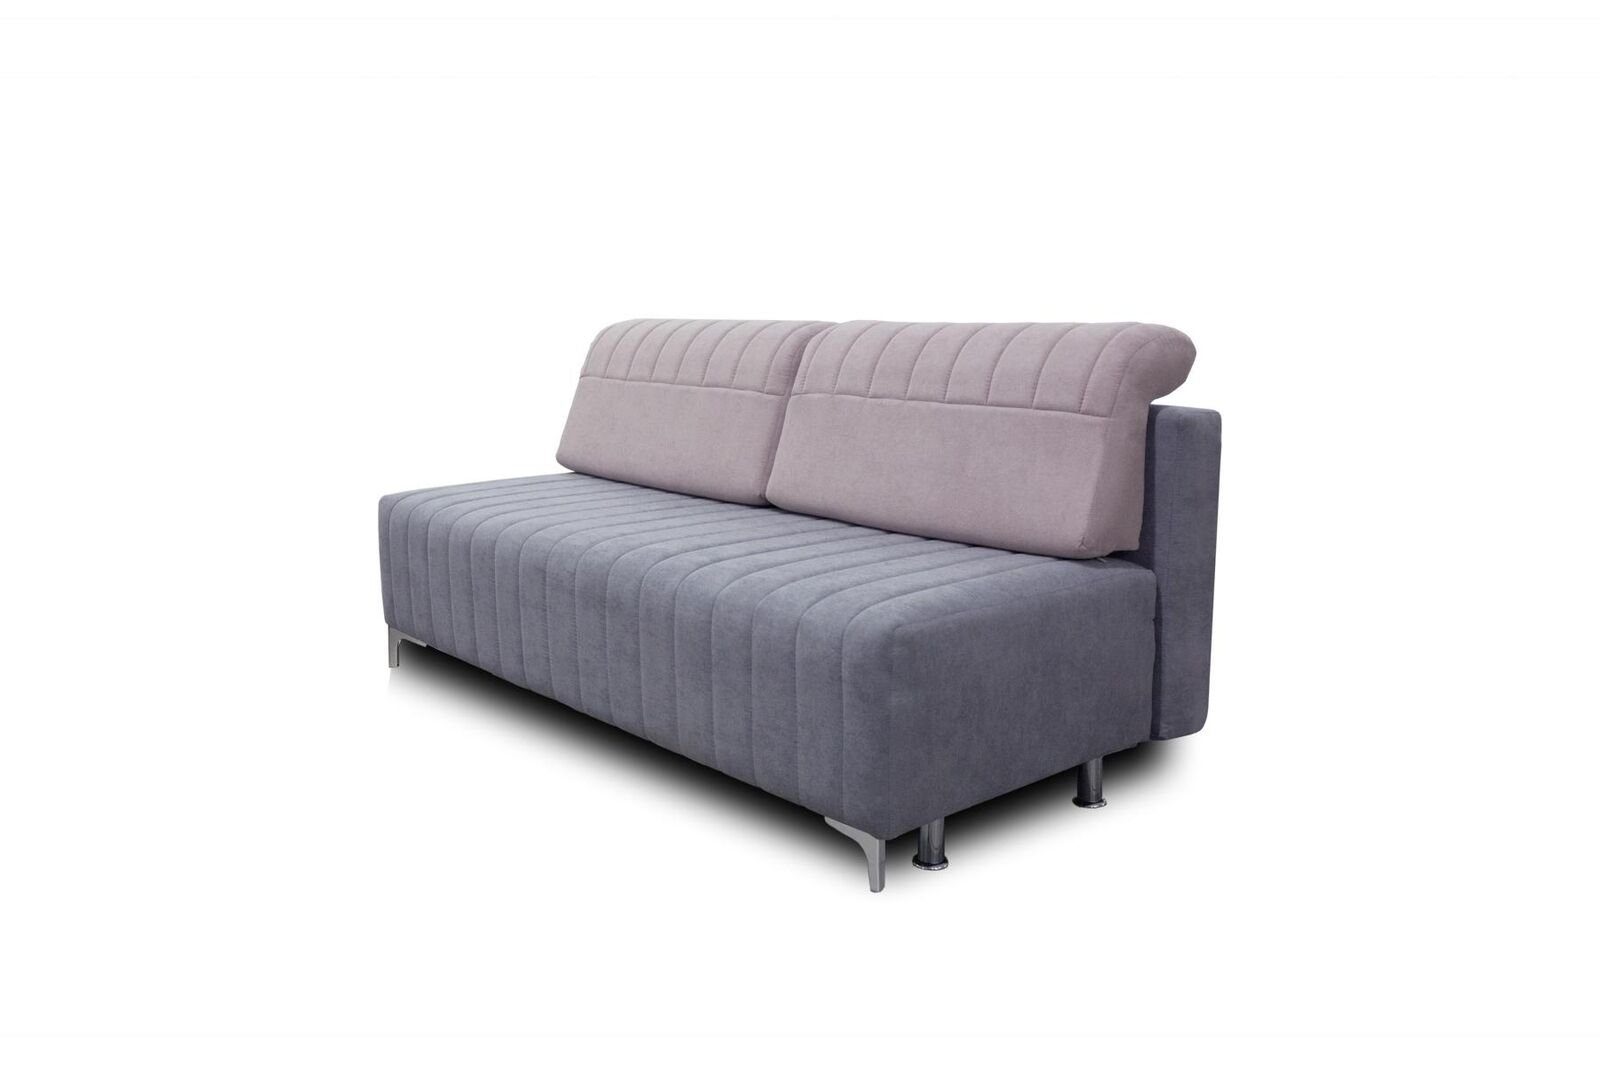 Sofa Lounge 2 Stoff Sofa, Europe JVmoebel Polster Sofa Couch Sitzer Made Design in